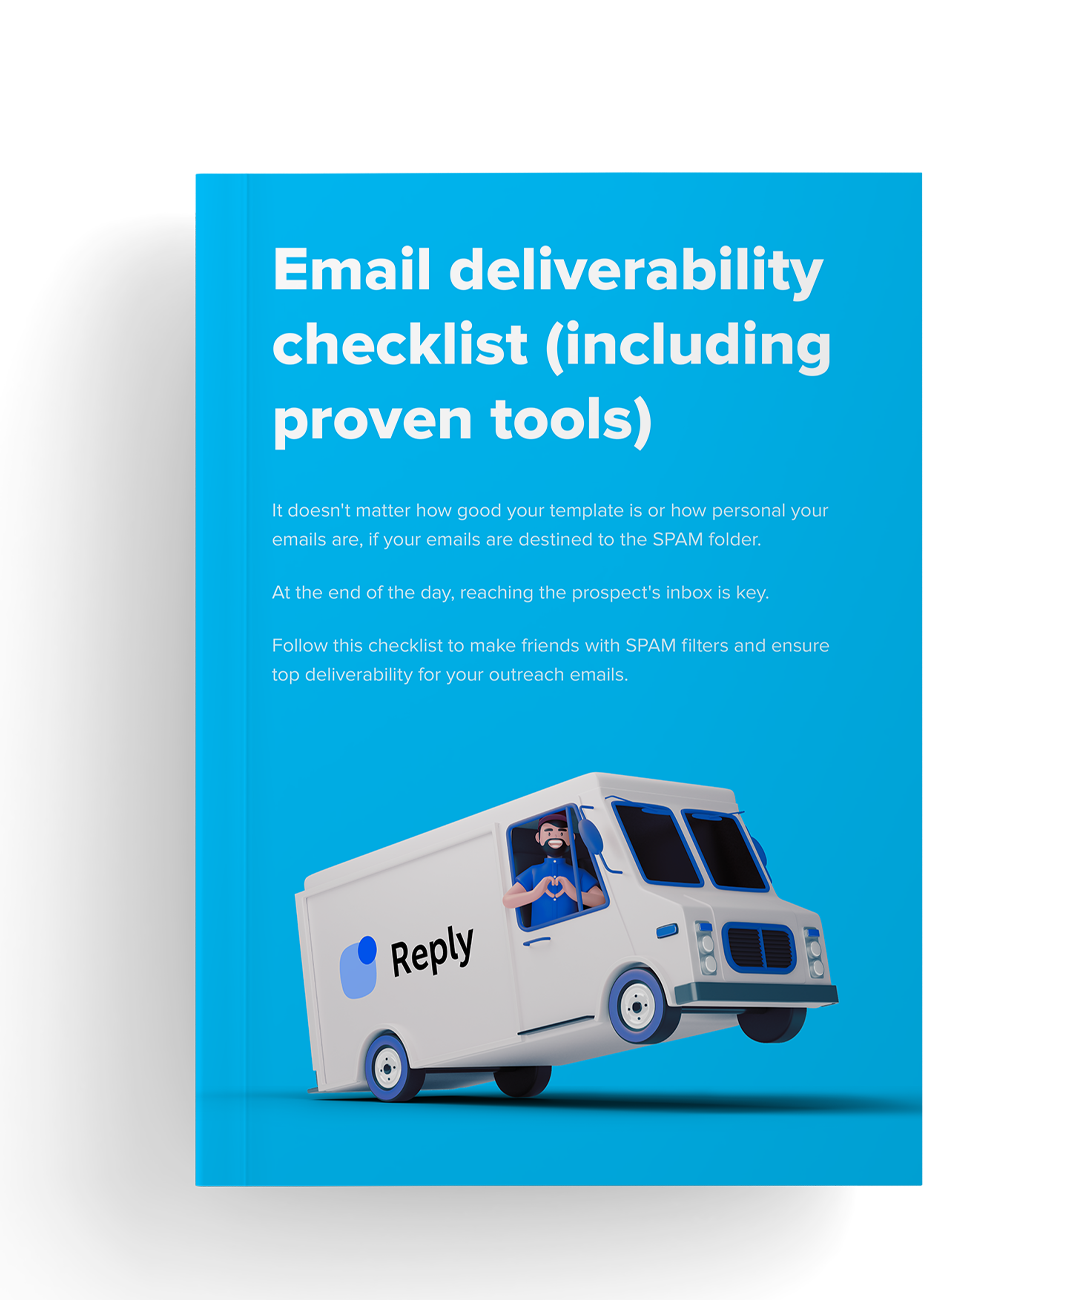 Email deliverability checklist (including proven tools)